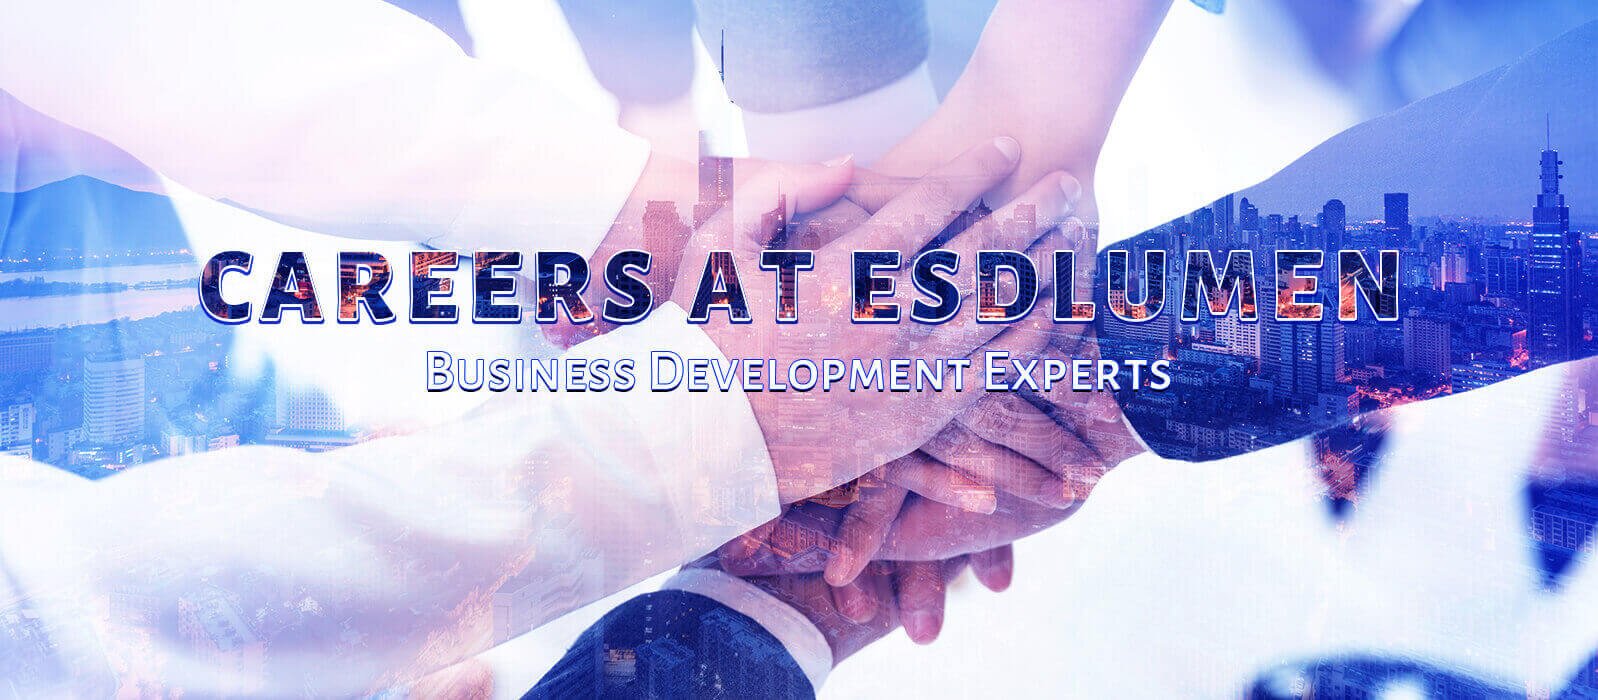 Careers at Esdlumen! Business Development Experts Needed!